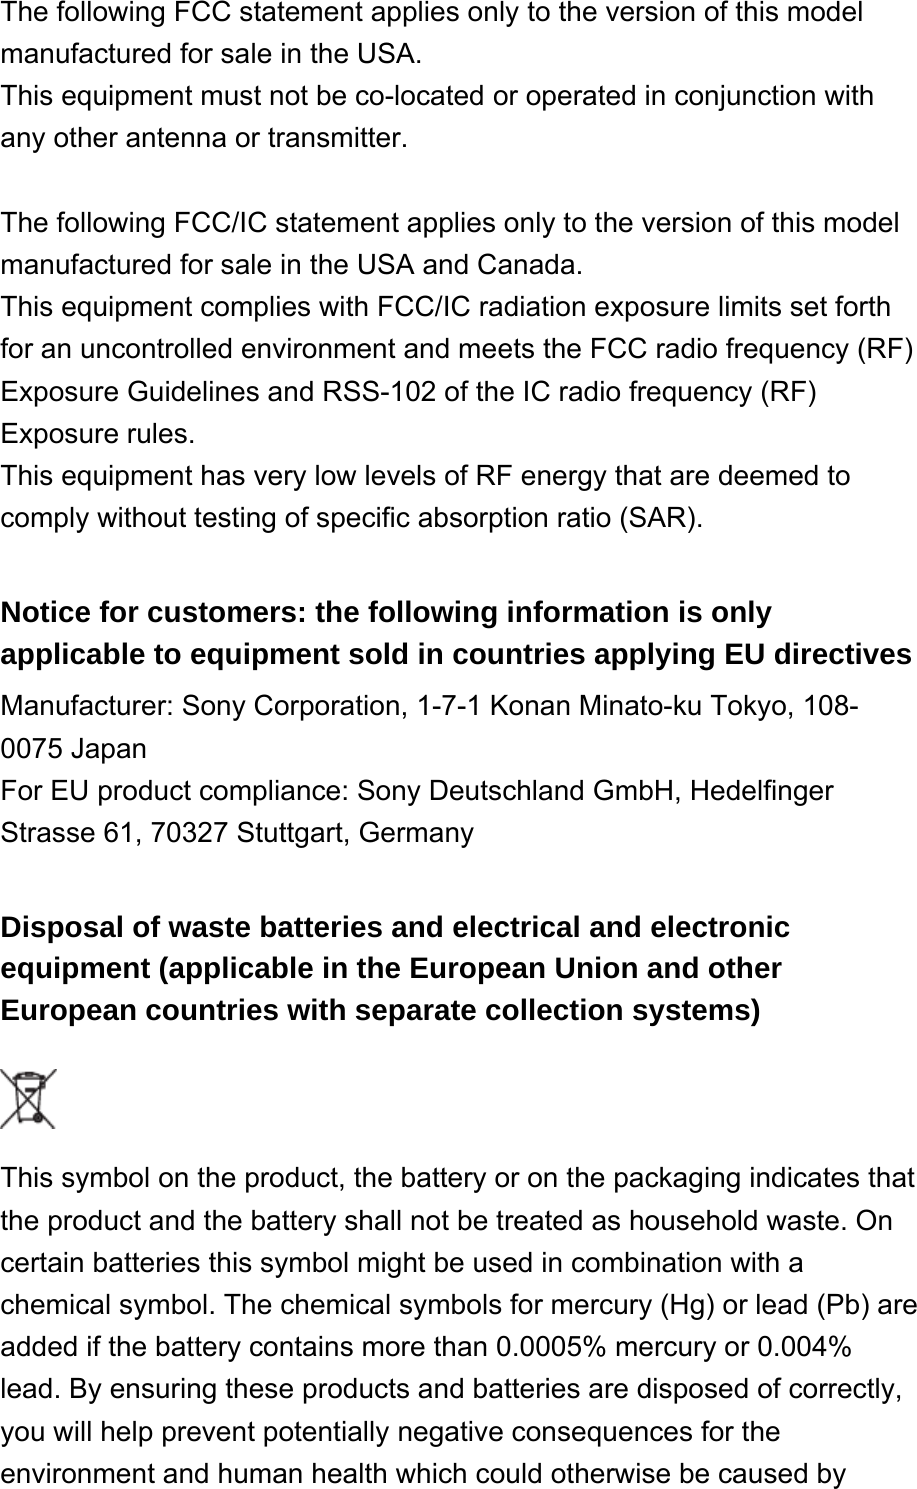 The following FCC statement applies only to the version of this model manufactured for sale in the USA. This equipment must not be co-located or operated in conjunction with any other antenna or transmitter. The following FCC/IC statement applies only to the version of this model manufactured for sale in the USA and Canada.This equipment complies with FCC/IC radiation exposure limits set forth for an uncontrolled environment and meets the FCC radio frequency (RF) Exposure Guidelines and RSS-102 of the IC radio frequency (RF) Exposure rules.This equipment has very low levels of RF energy that are deemed to comply without testing of specific absorption ratio (SAR). Notice for customers: the following information is only applicable to equipment sold in countries applying EU directives Manufacturer: Sony Corporation, 1-7-1 Konan Minato-ku Tokyo, 108-0075 JapanFor EU product compliance: Sony Deutschland GmbH, Hedelfinger Strasse 61, 70327 Stuttgart, Germany Disposal of waste batteries and electrical and electronic equipment (applicable in the European Union and other European countries with separate collection systems)  This symbol on the product, the battery or on the packaging indicates that the product and the battery shall not be treated as household waste. On certain batteries this symbol might be used in combination with a chemical symbol. The chemical symbols for mercury (Hg) or lead (Pb) are added if the battery contains more than 0.0005% mercury or 0.004% lead. By ensuring these products and batteries are disposed of correctly, you will help prevent potentially negative consequences for the environment and human health which could otherwise be caused by 